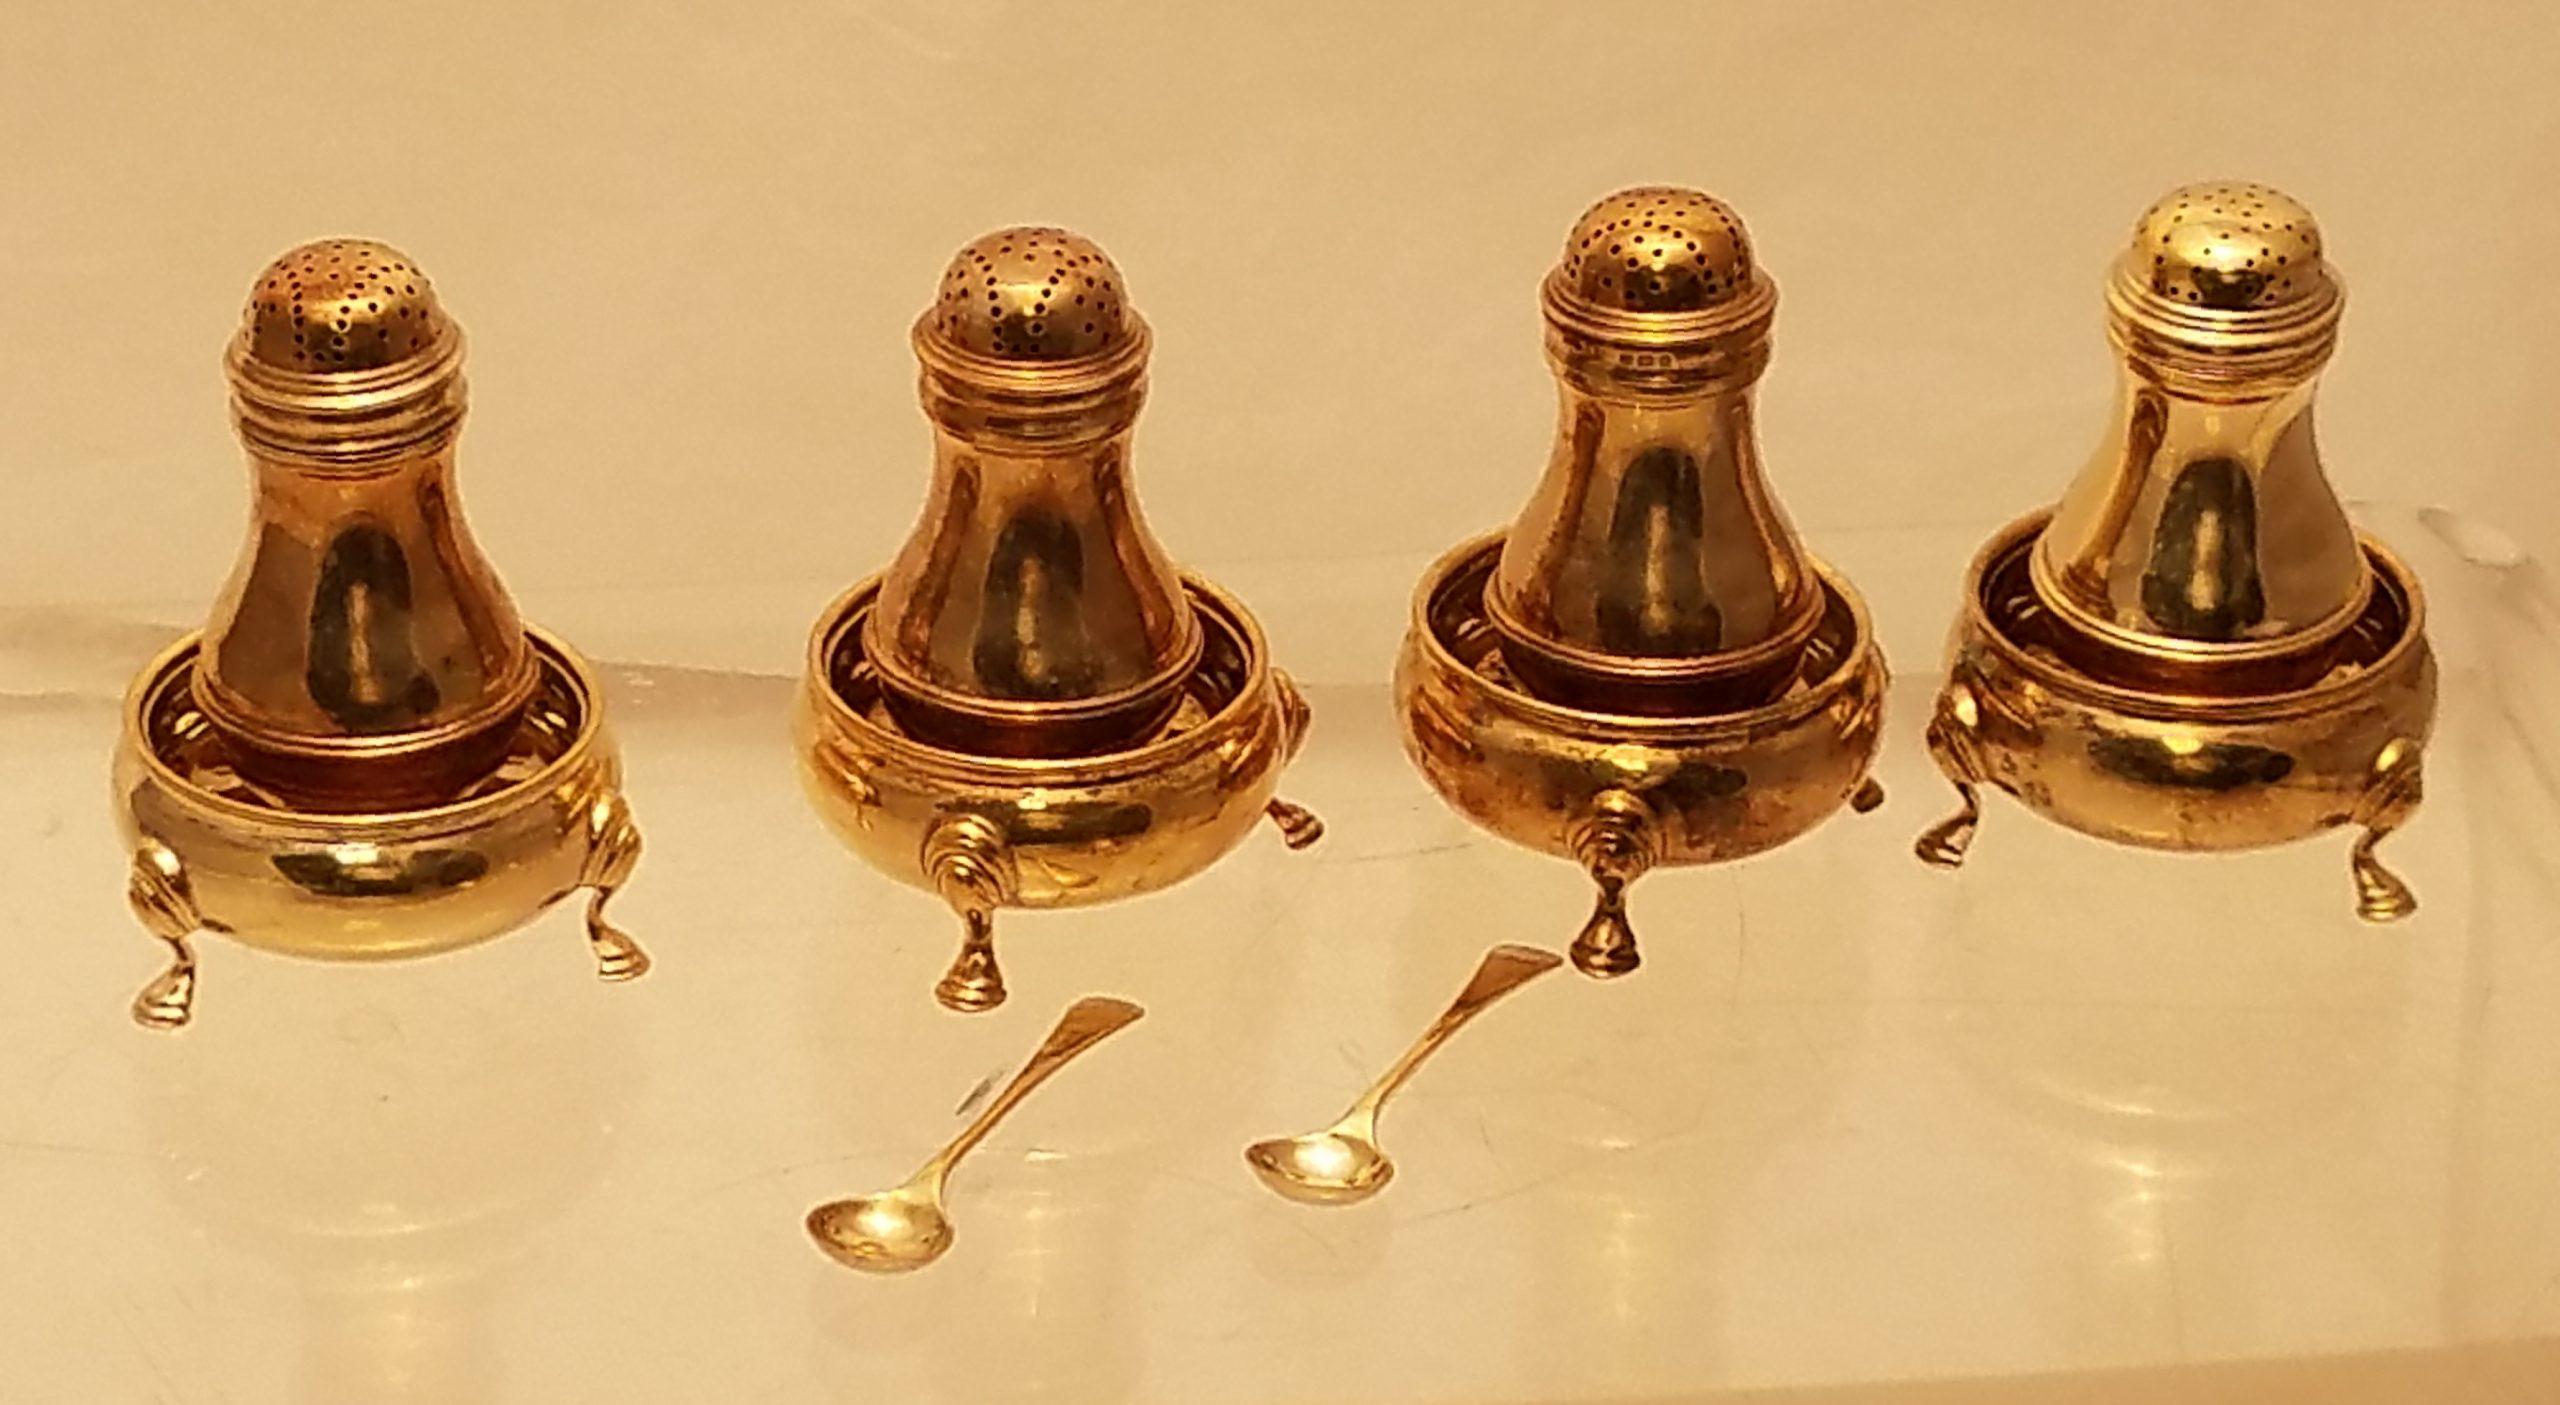 Georgian Set of 8 Comyns 1927 Gilt English Sterling Silver Shakers and Condiment Dishes For Sale